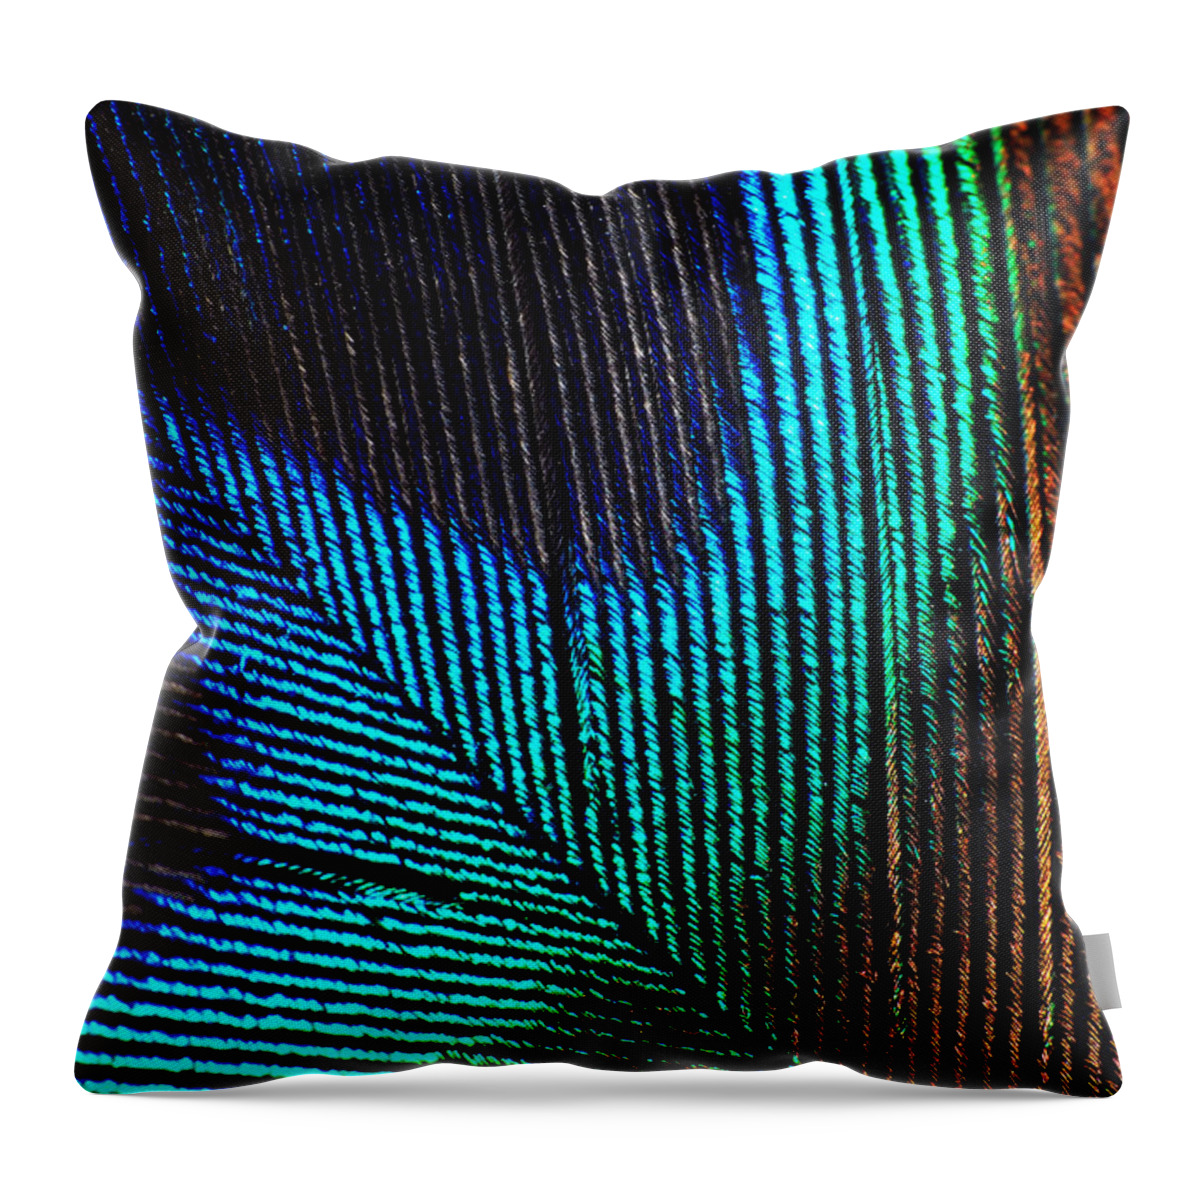 Photograph Throw Pillow featuring the photograph Peacock Feather by Larah McElroy